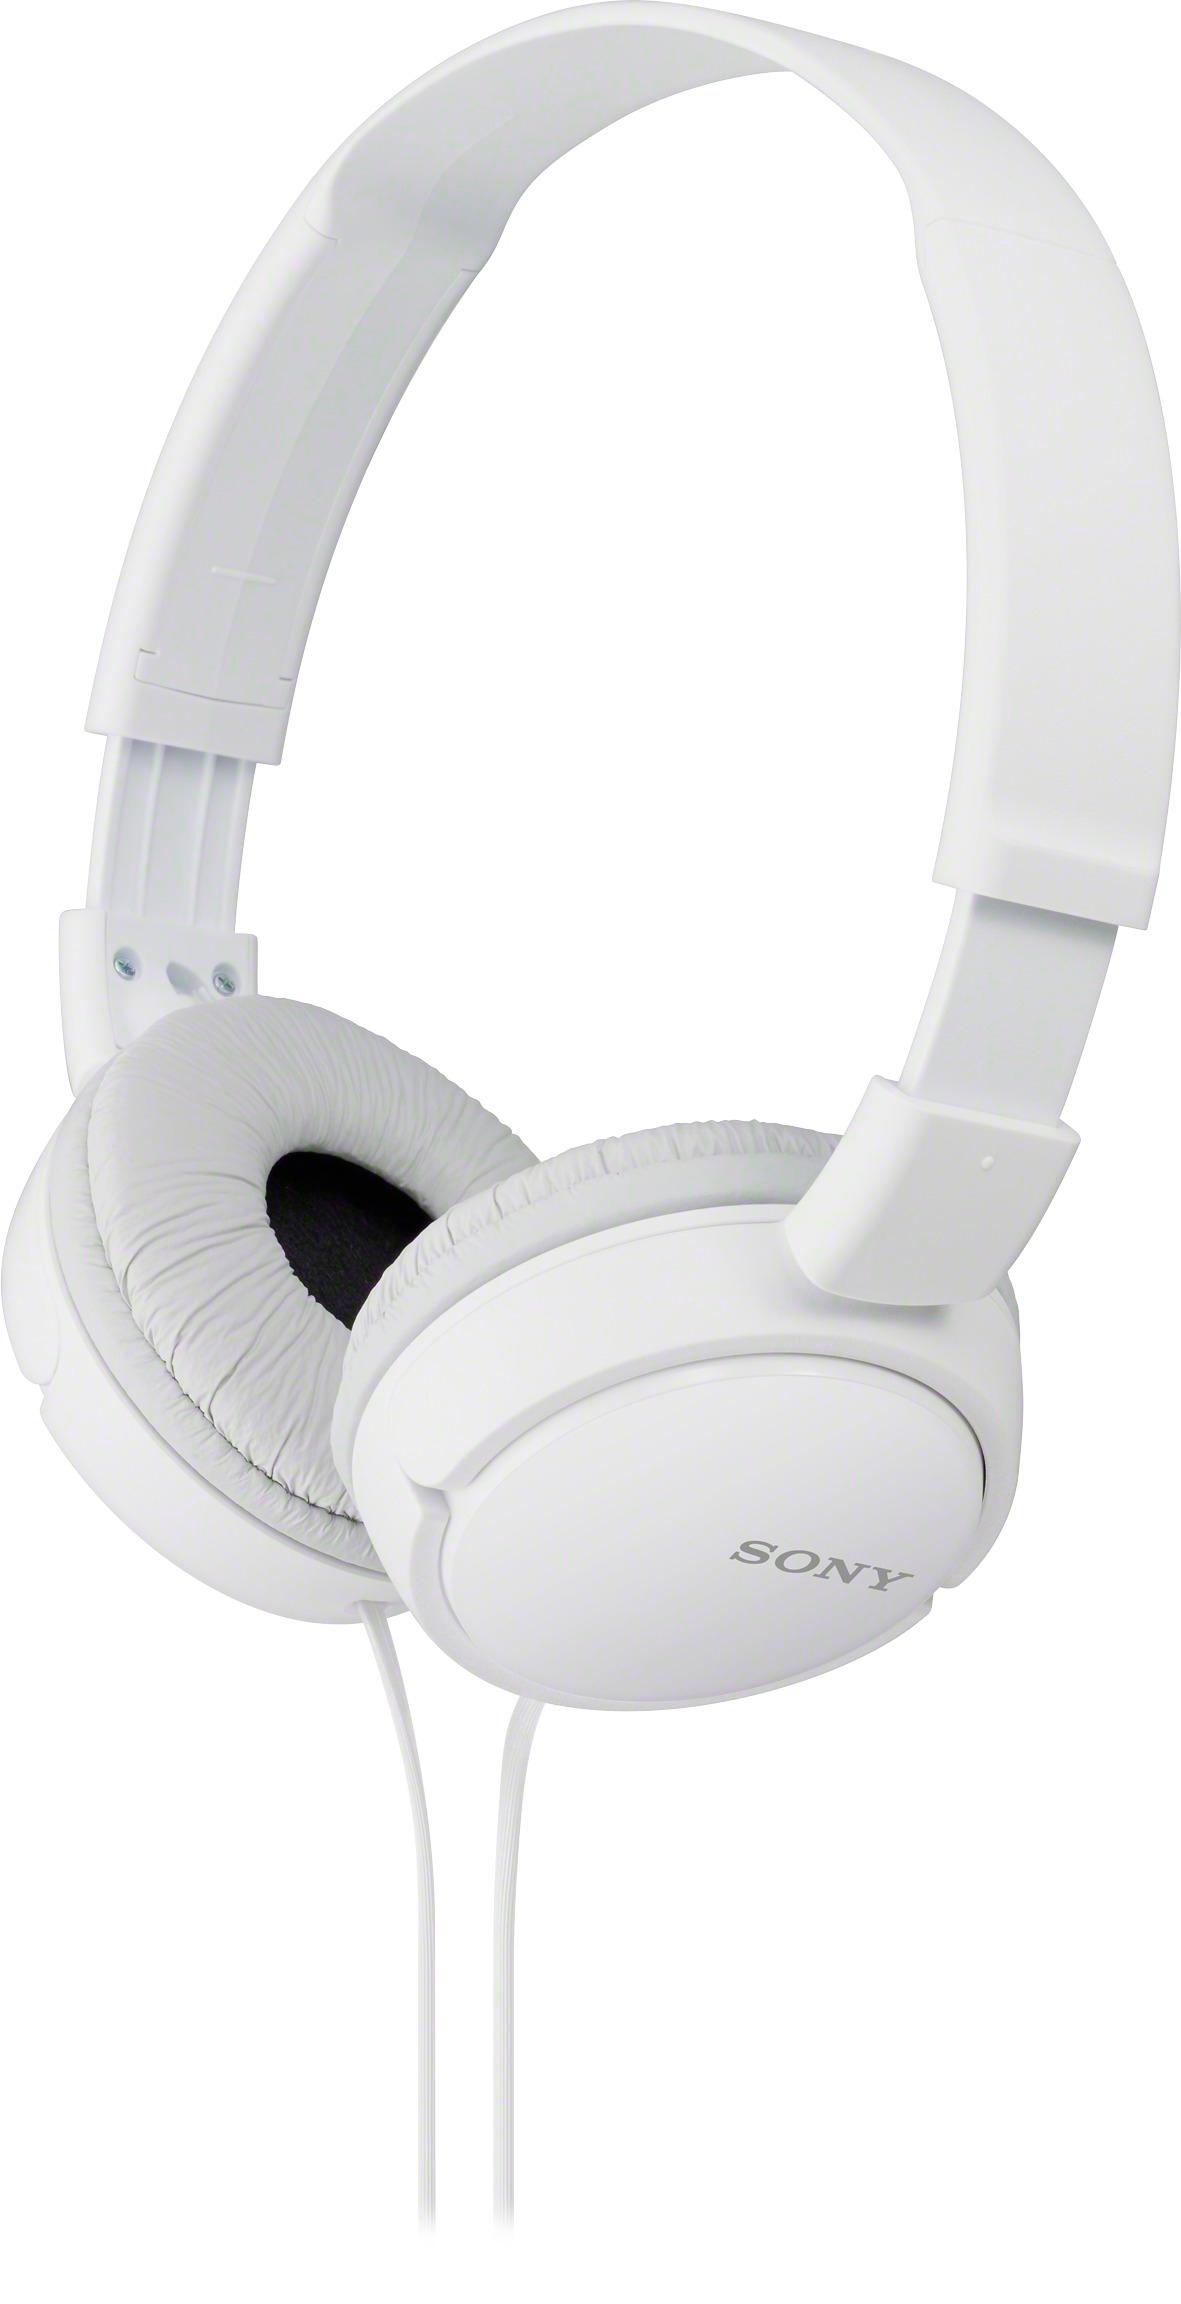 Sony ZX Series Wired On-Ear Headphones White MDRZX110/W 